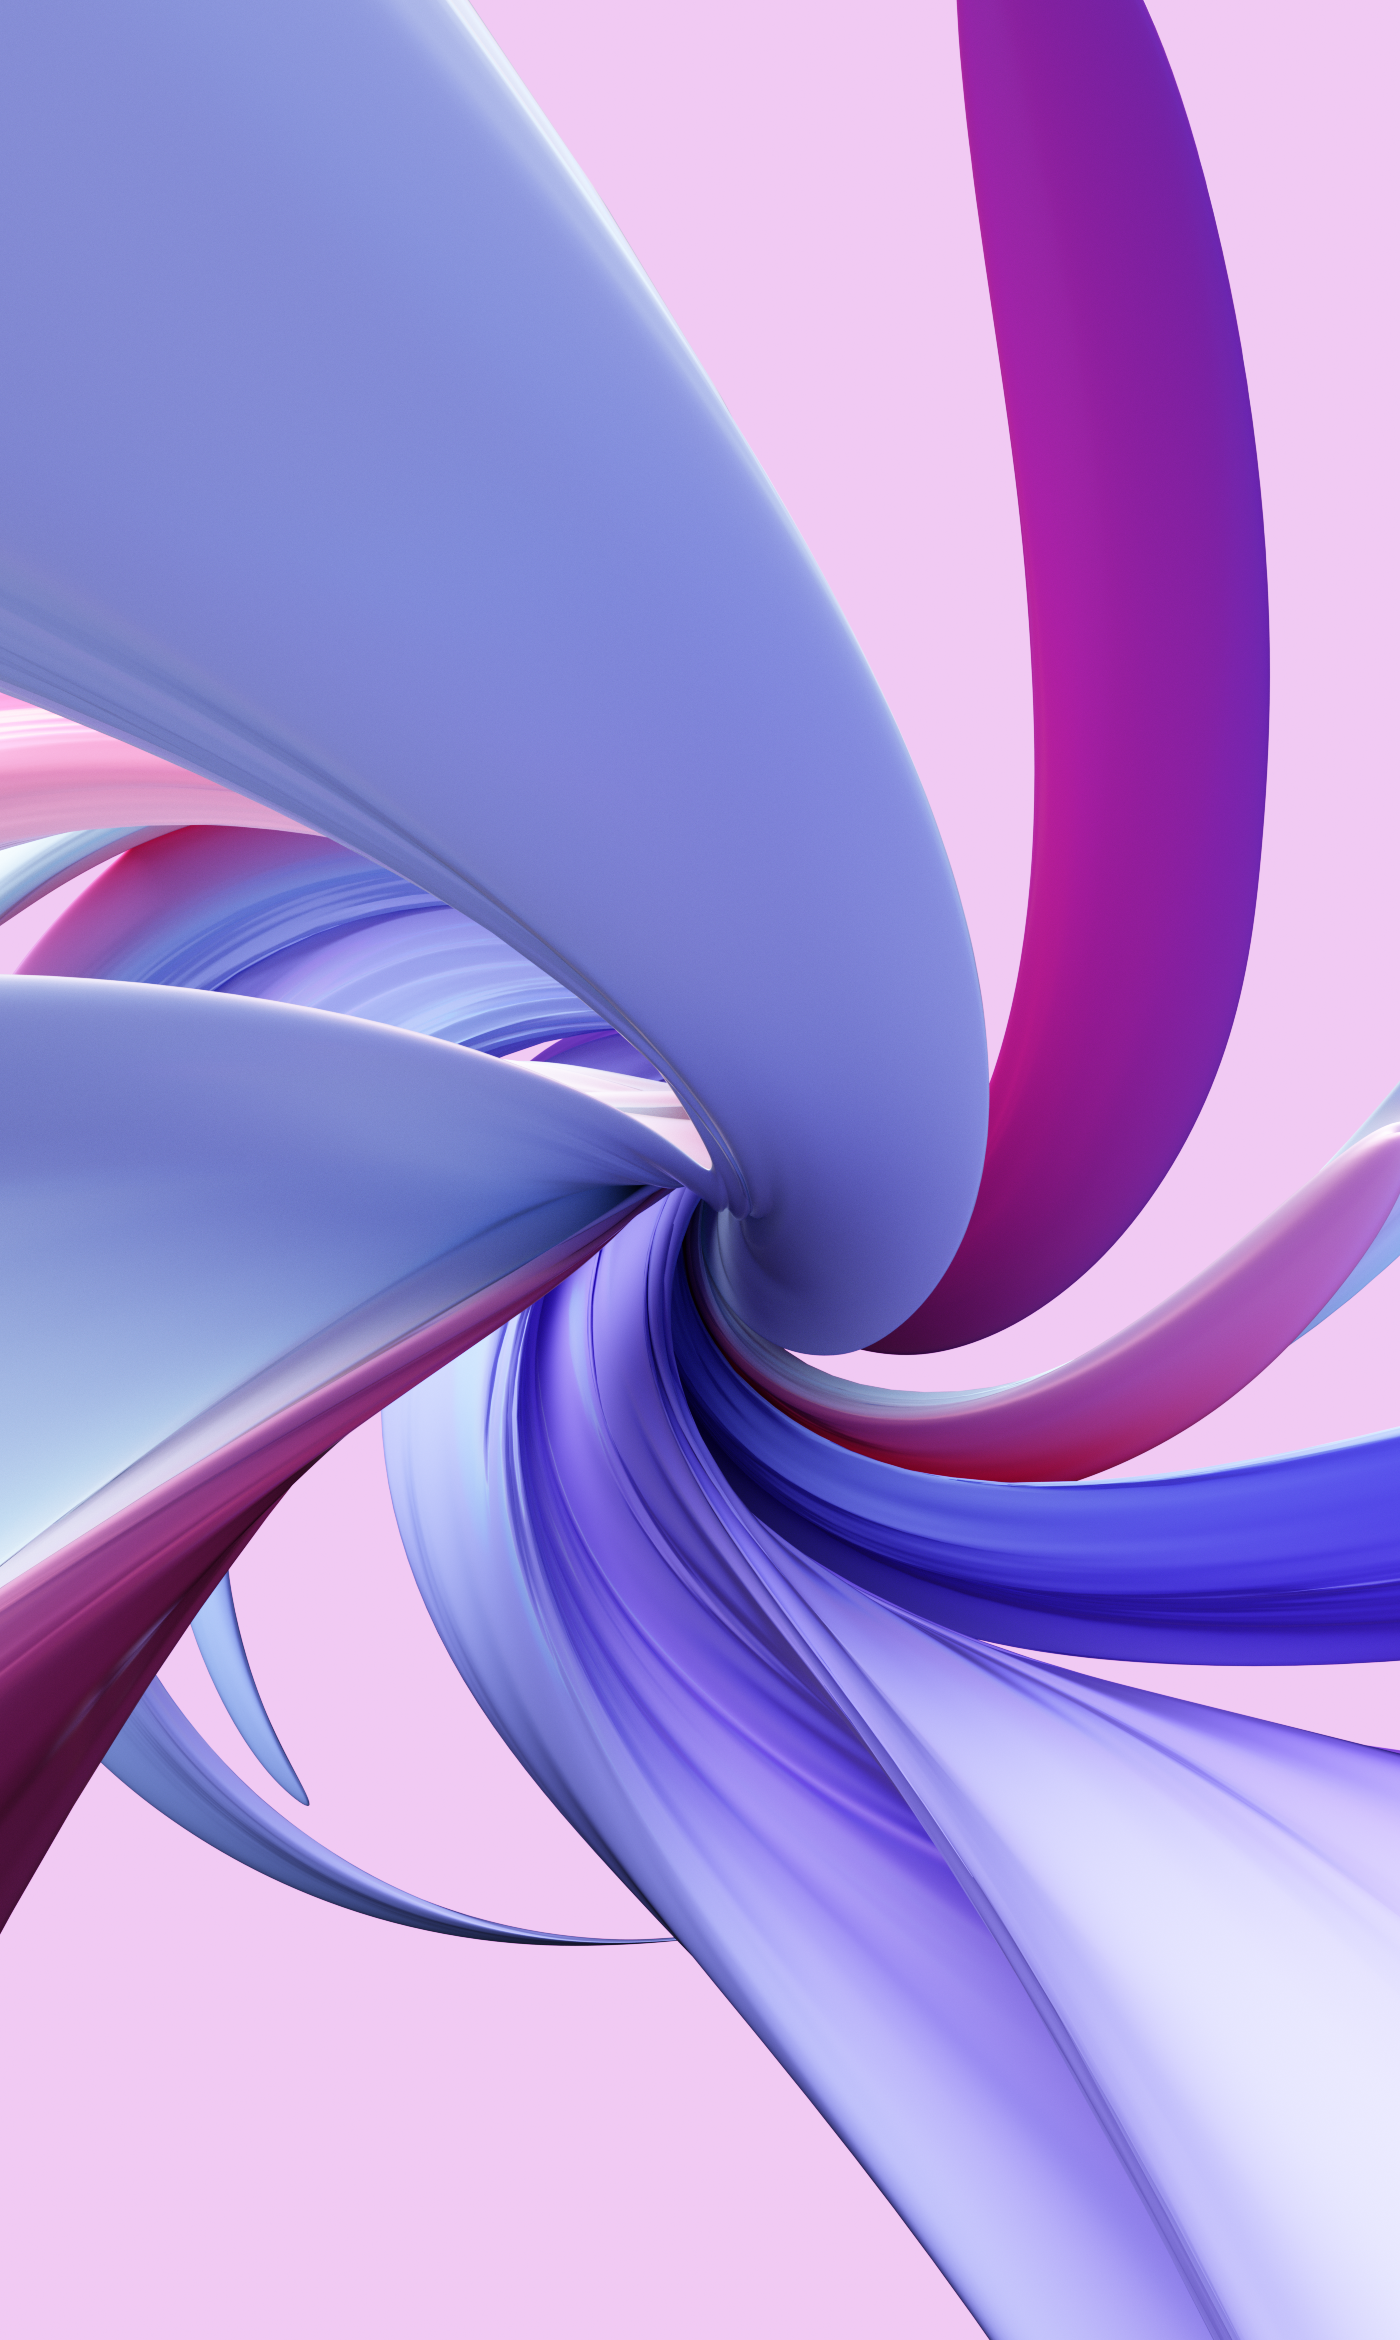 Curved Lines Series 1.0 on Behance2d751177426589.5ca4d29fbd005.png